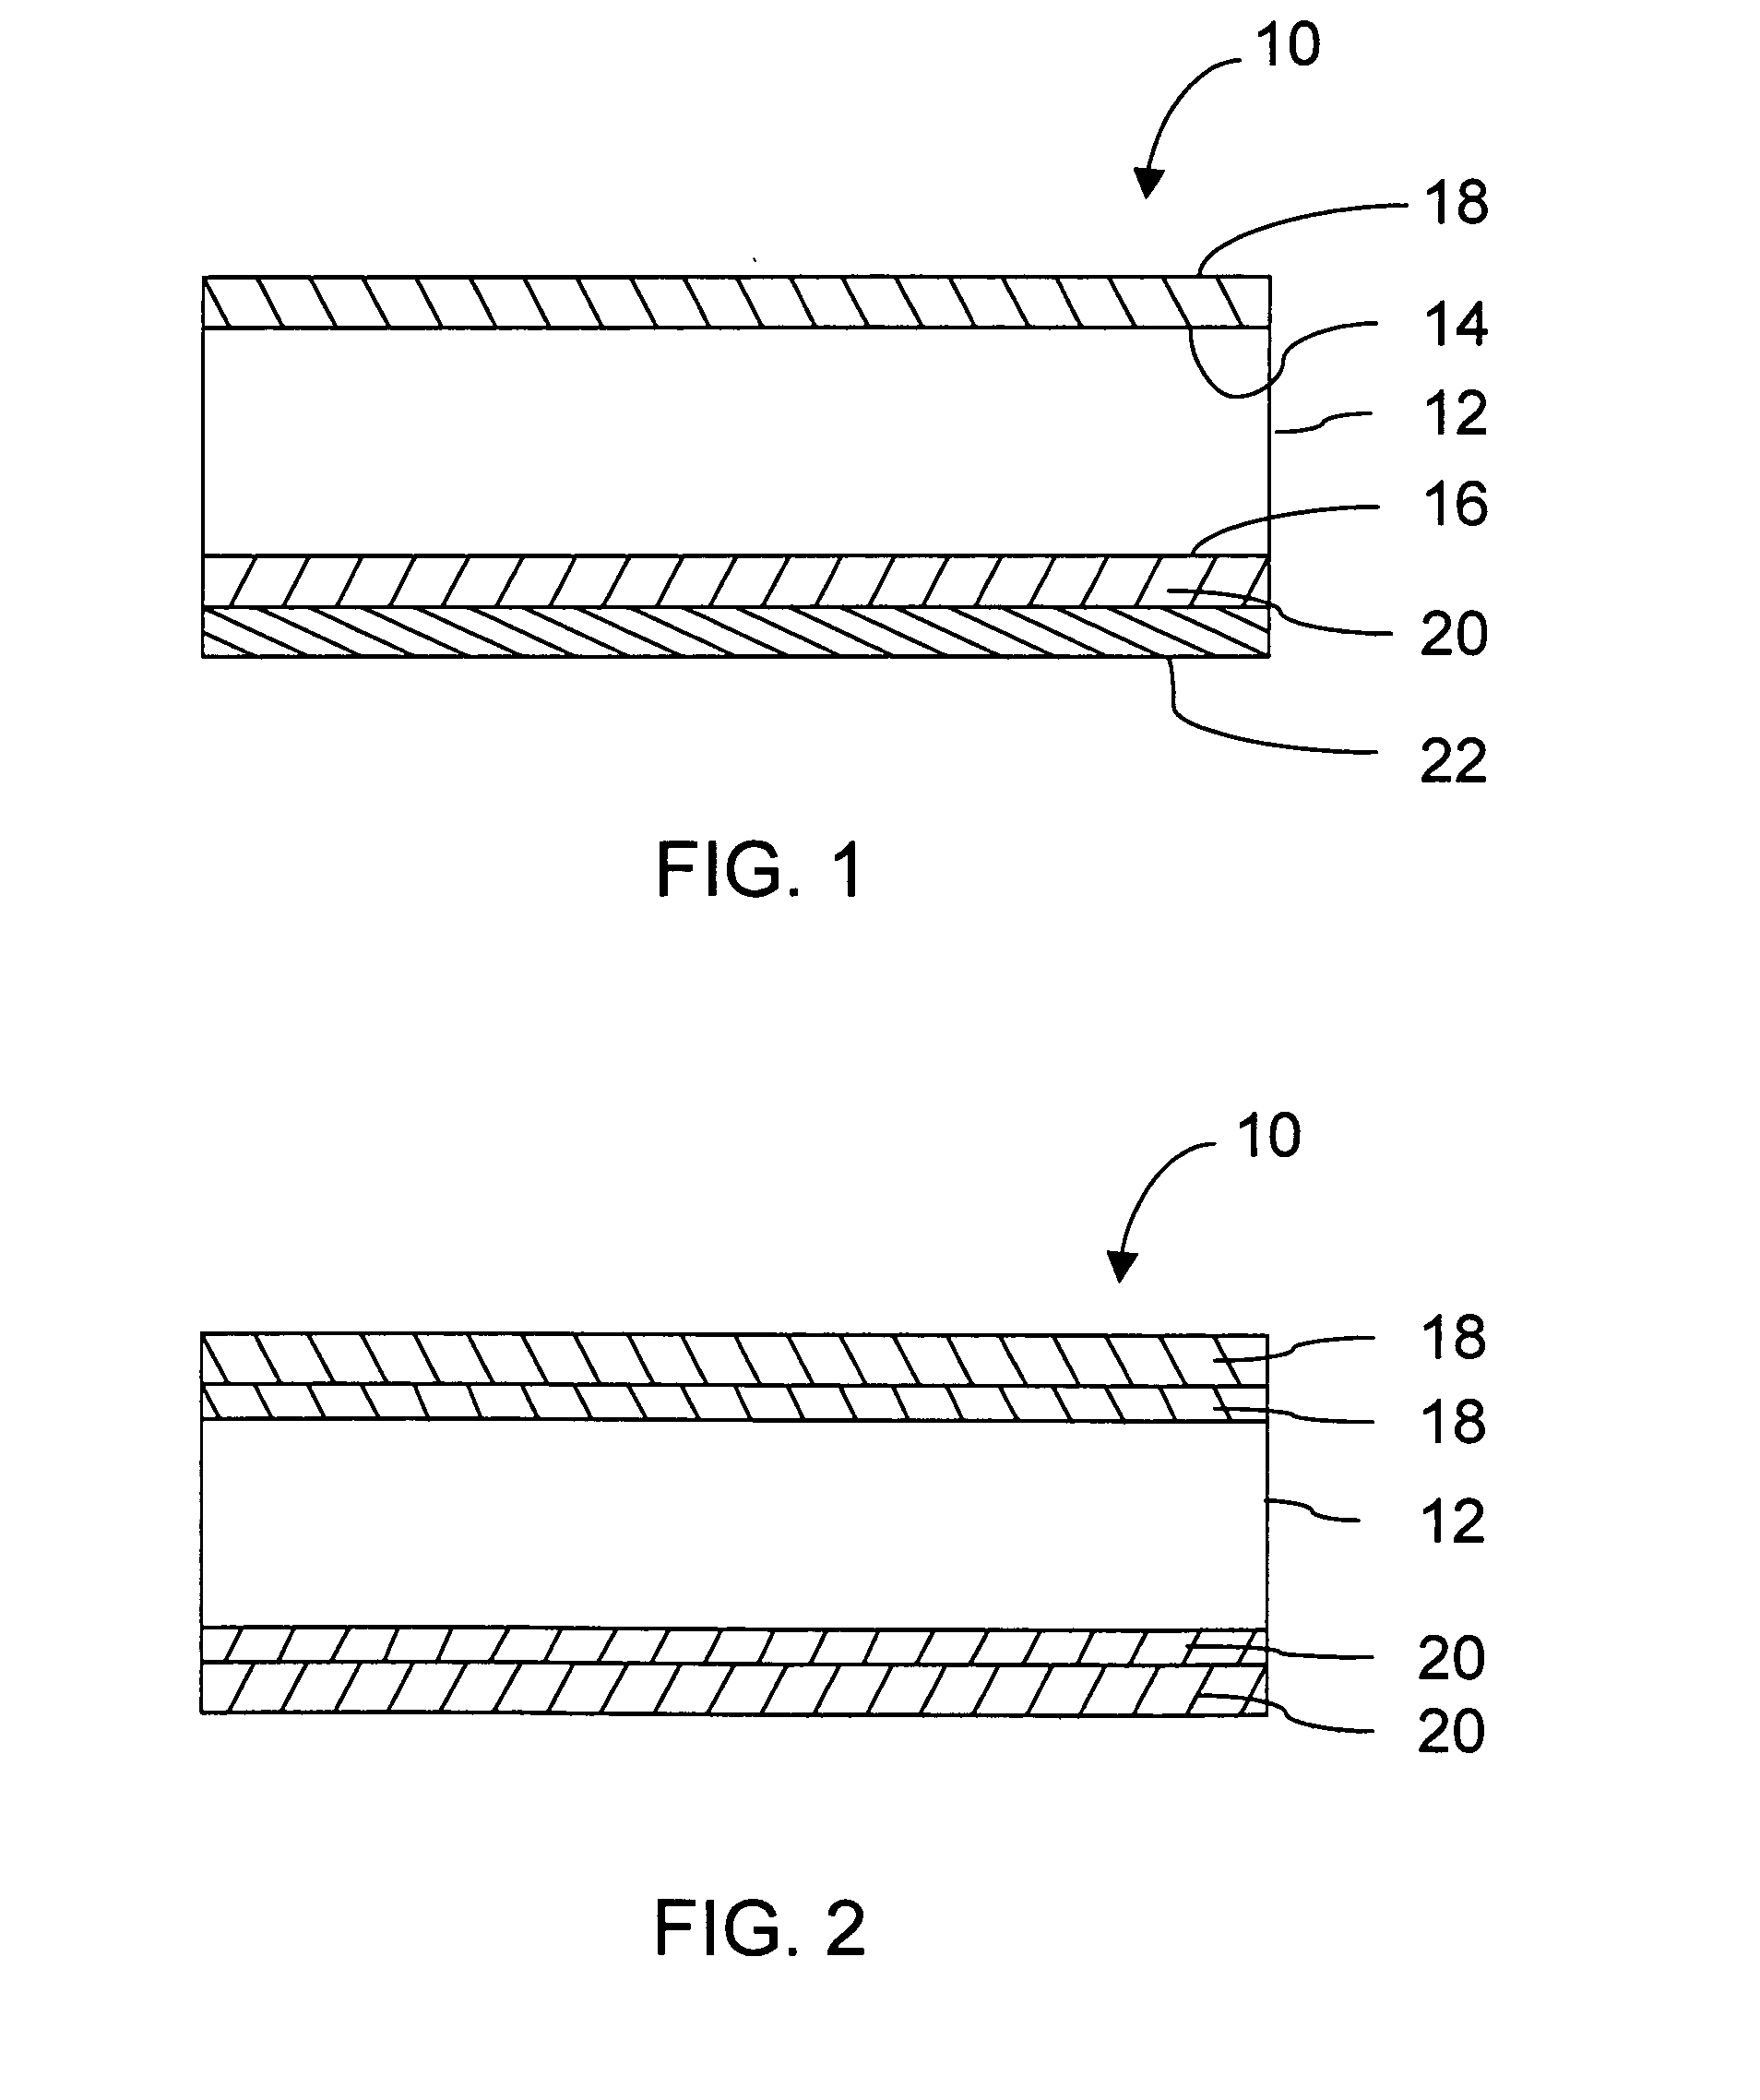 Thermoplastic composite material with improved smoke generation, heat release, and mechanical properties